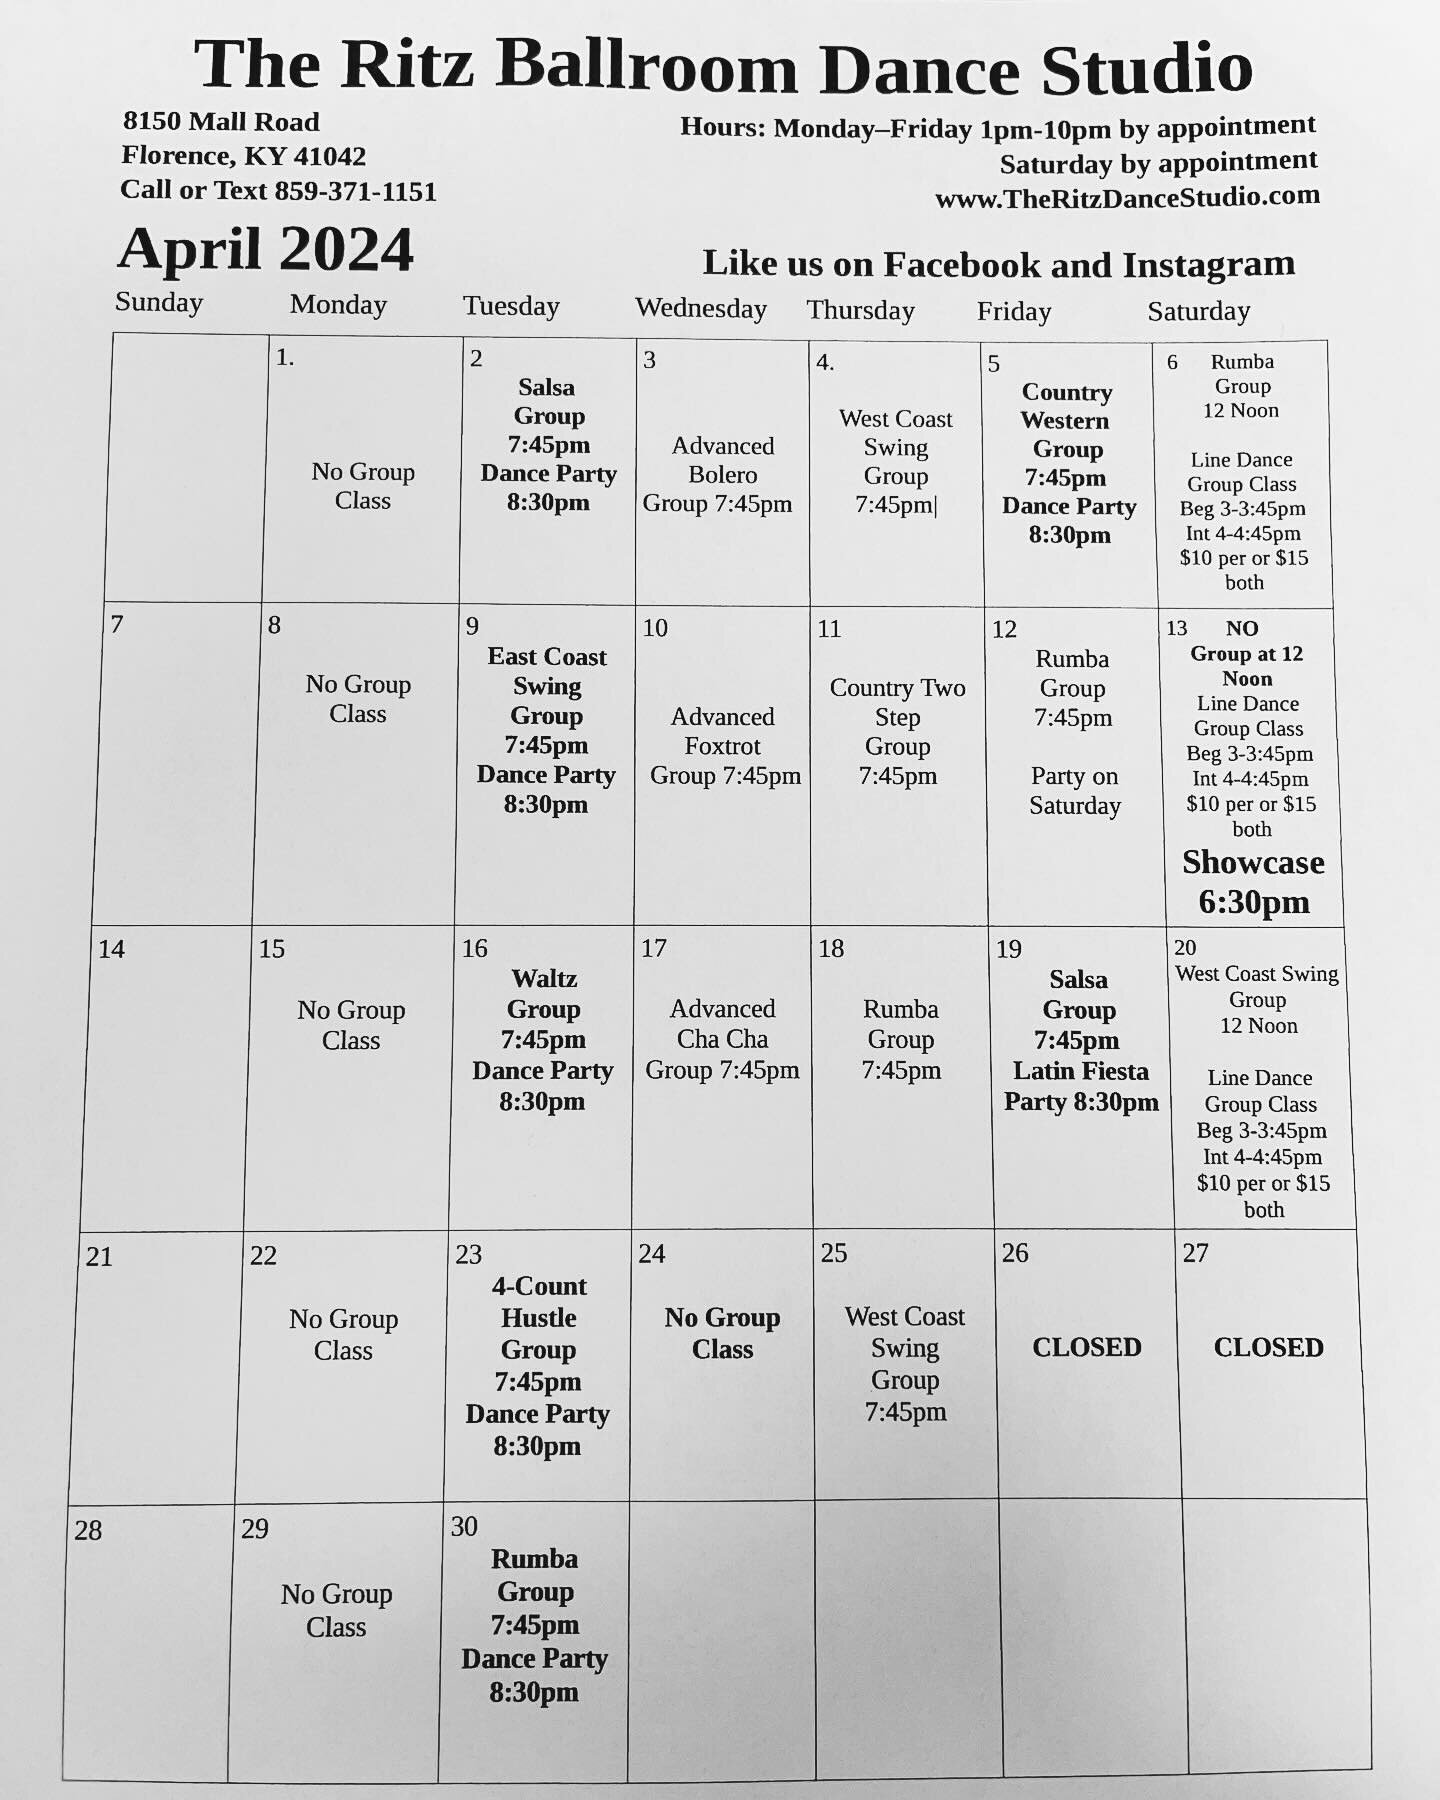 April Group Class Schedule is out! 🐣🌸🐰🍫🩵💐
PLEASE NOTE The 26th and 27th of this month we will be closed. There will be no group classes or line dancing that weekend! Thanks for understanding 💛